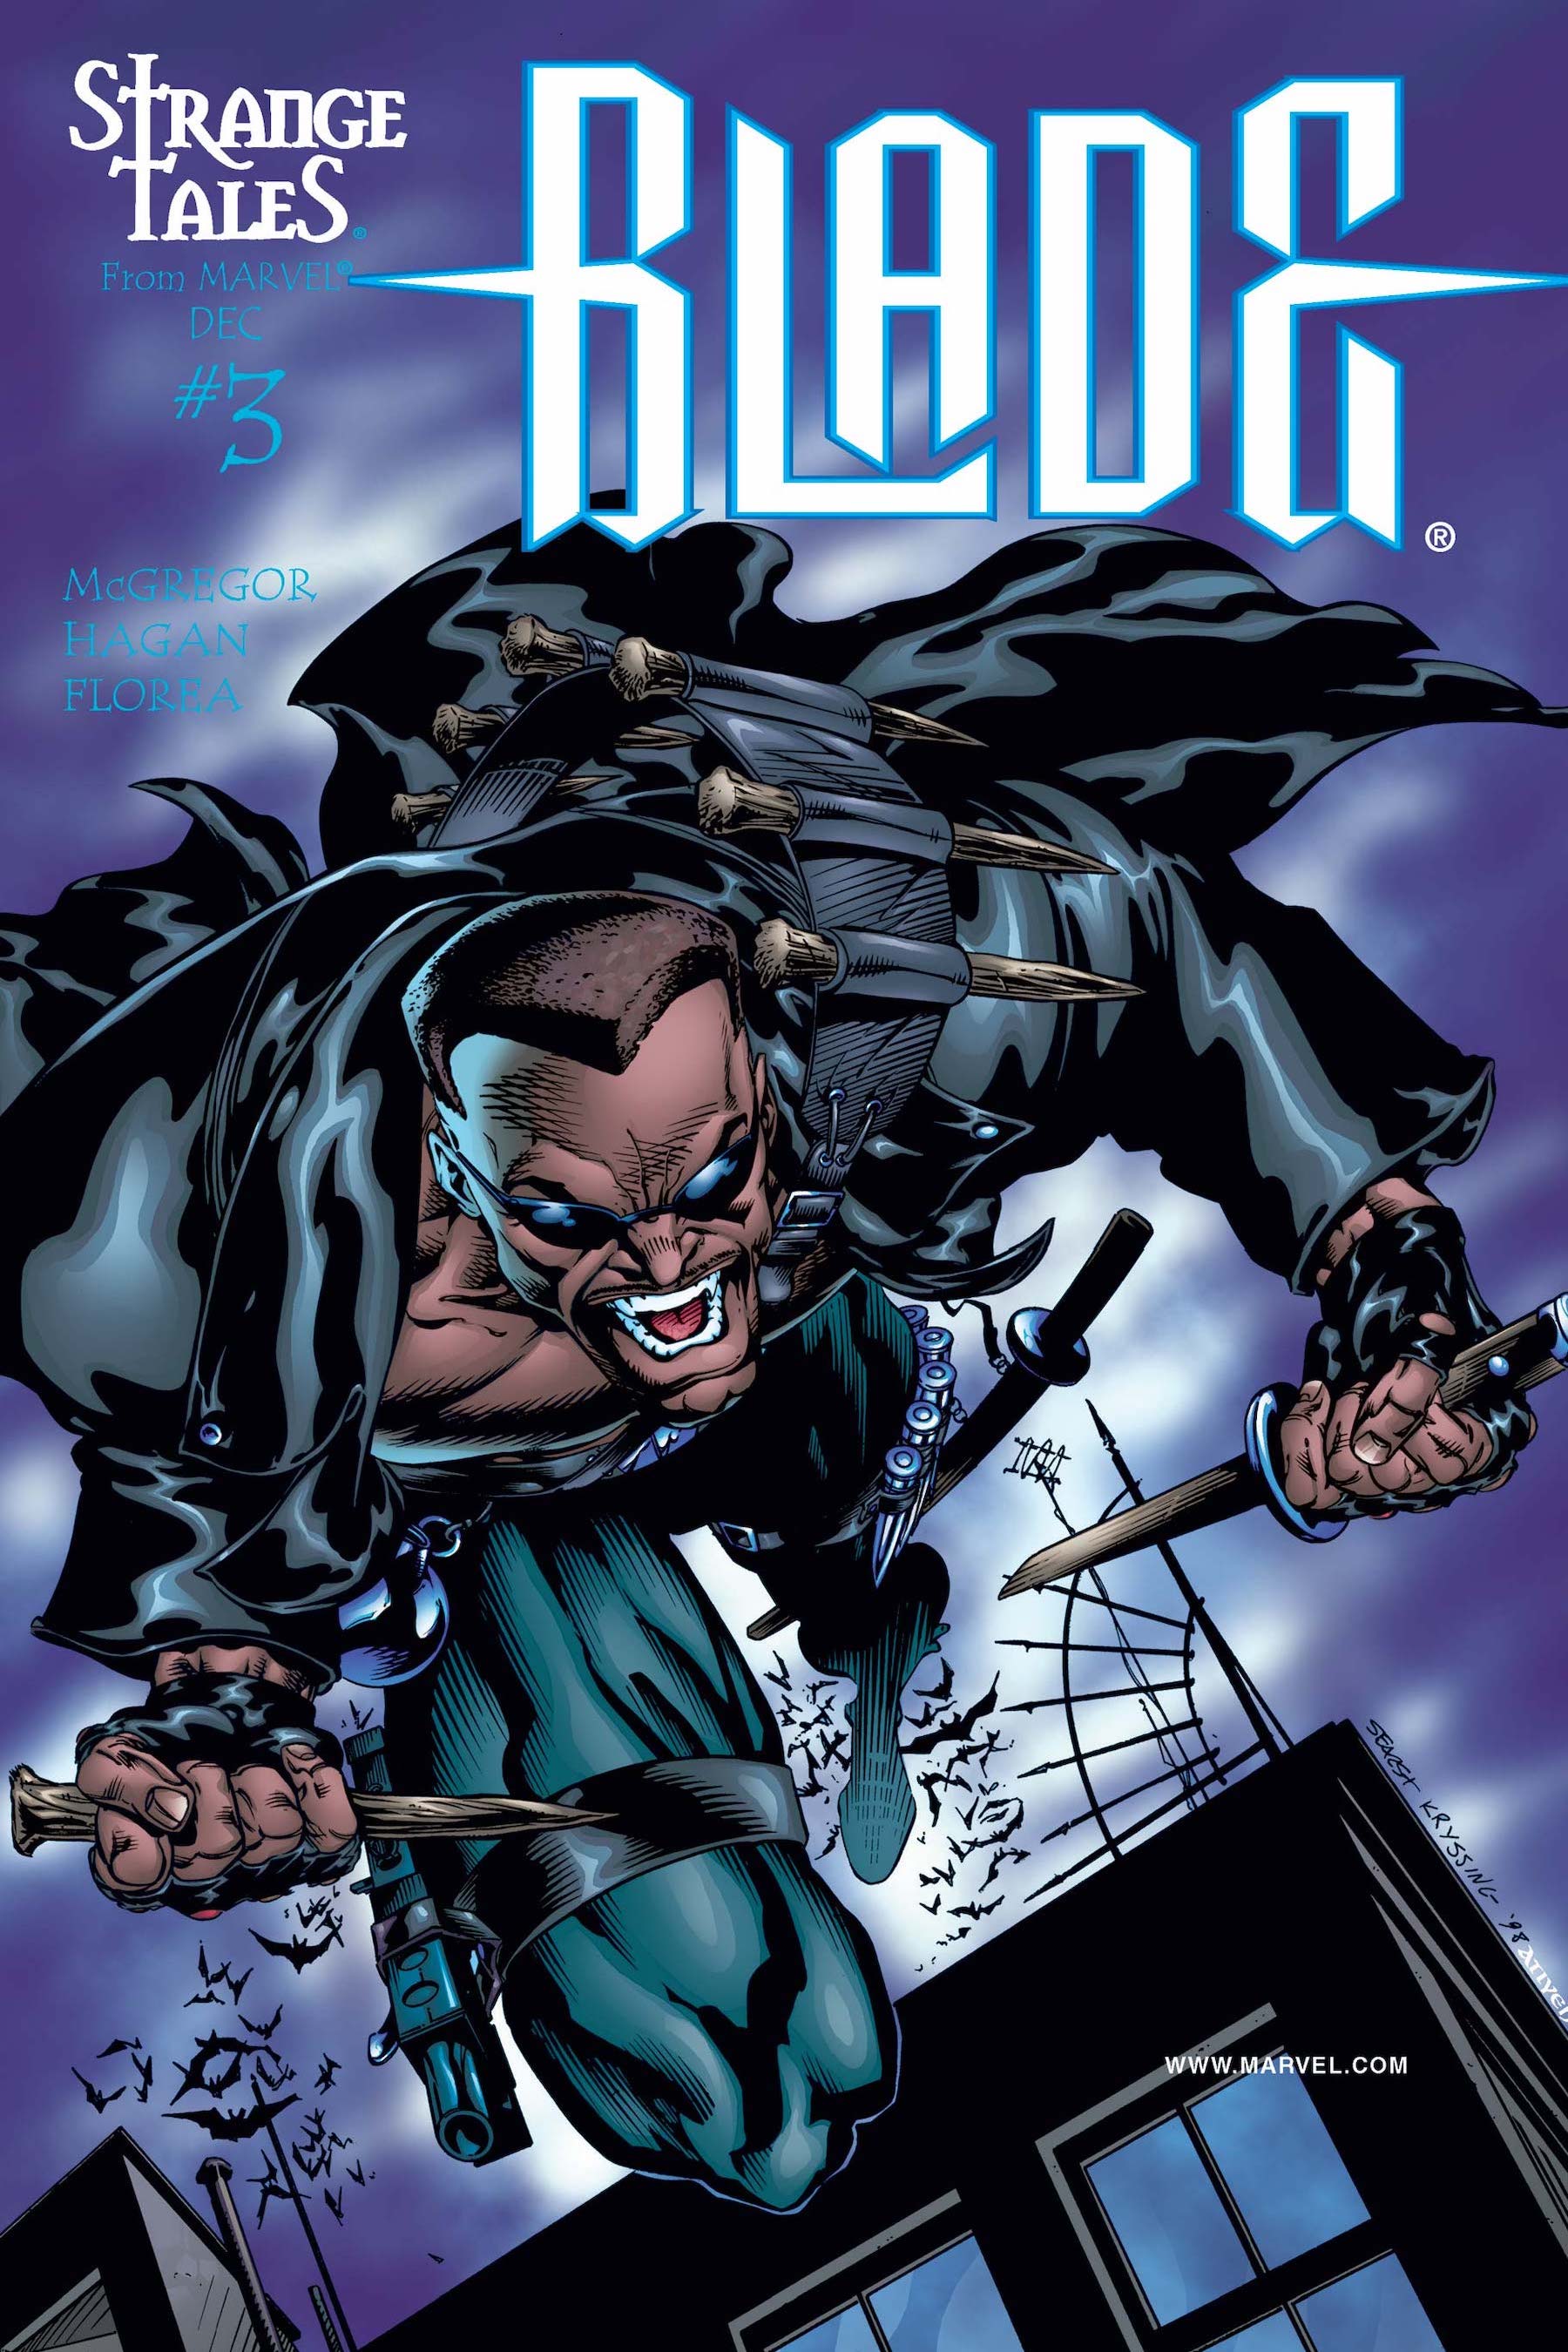 Najee Harris by Ray Anthony Height and Wil Quintana, after STRANGE TALES: BLADE #3 by Bart Sears